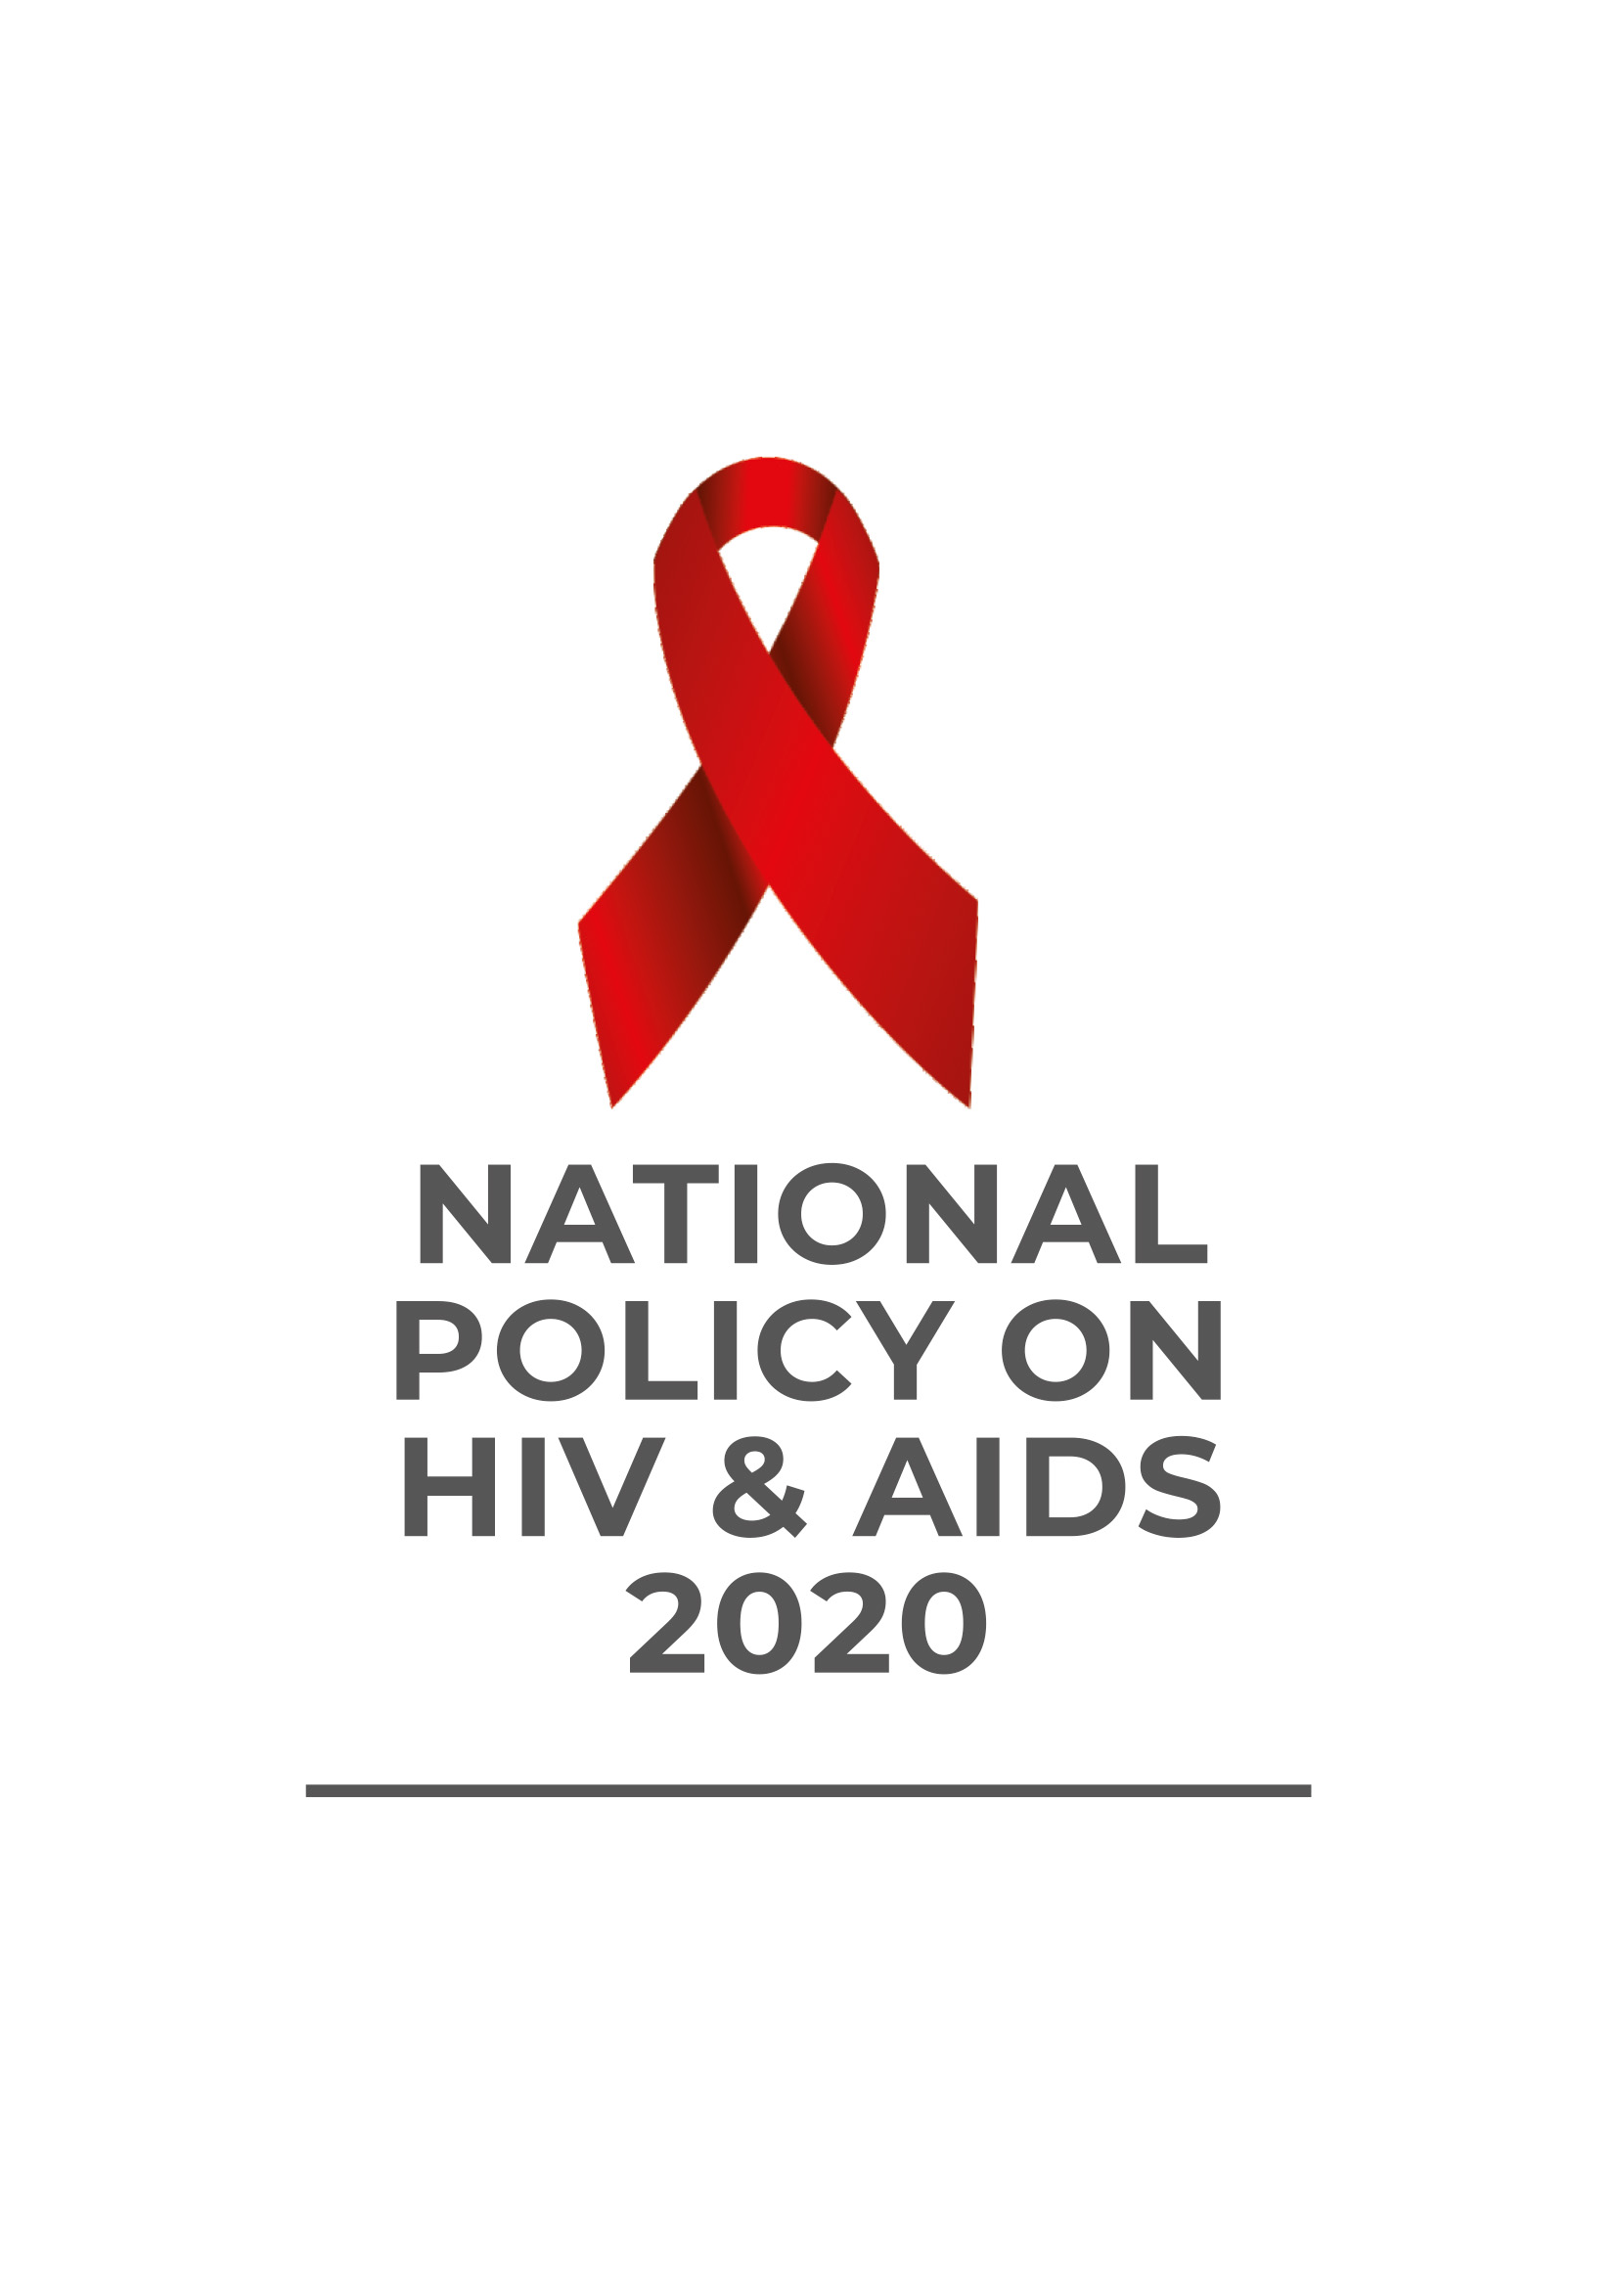 Nigeria national policy on HIV & AIDS 2020